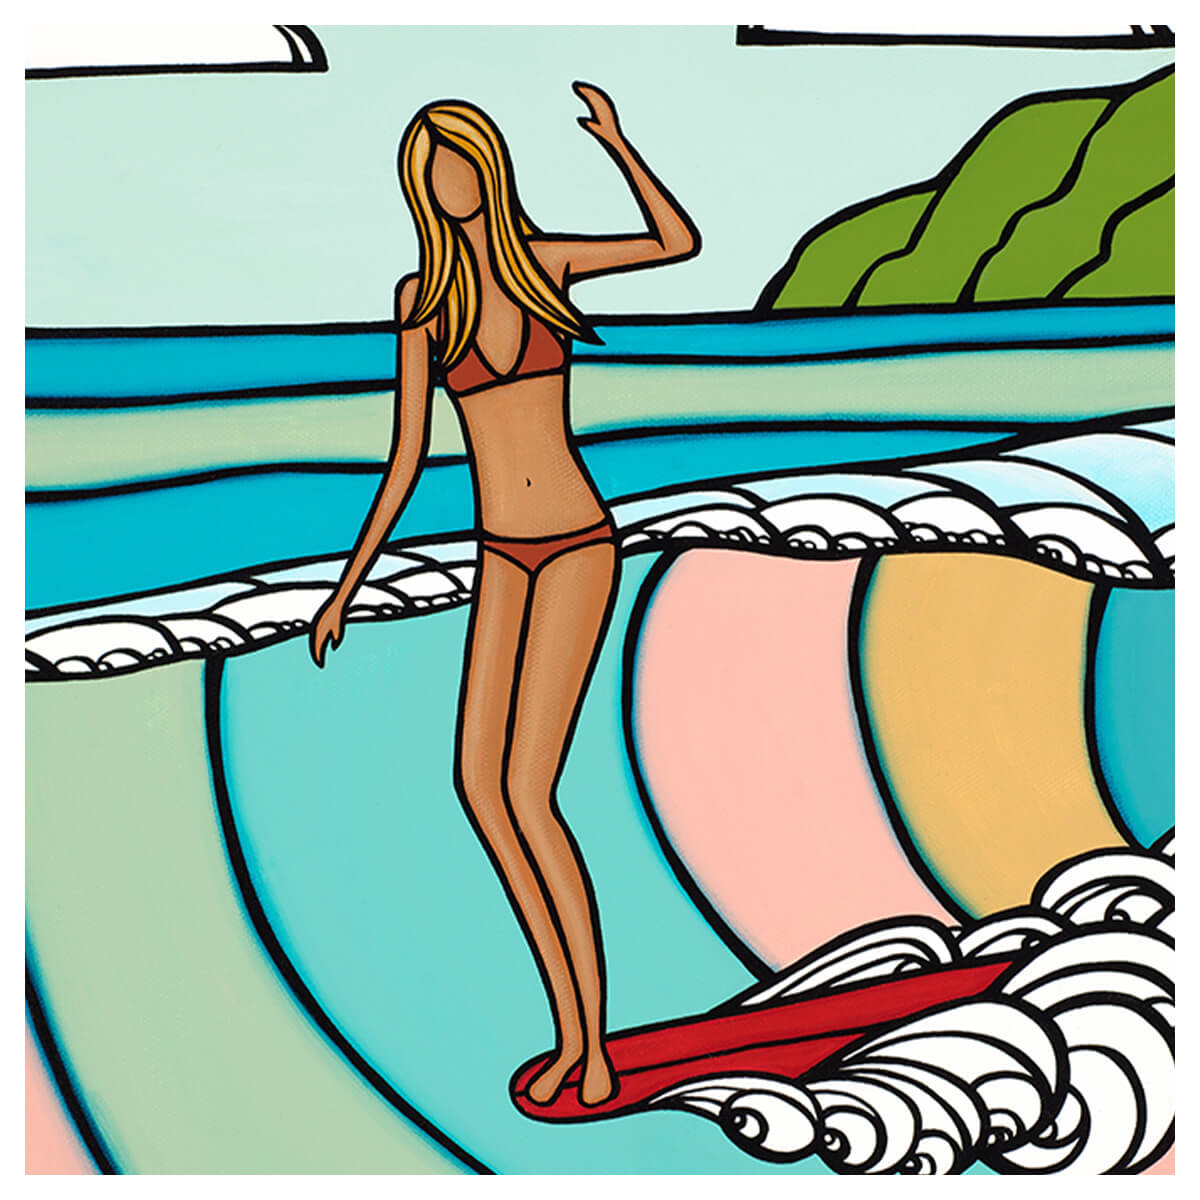 Tropical art by Hawaii artist Heather Brown featuring a surf girl on a red longboard riding a pastel colored wave - surfer detail